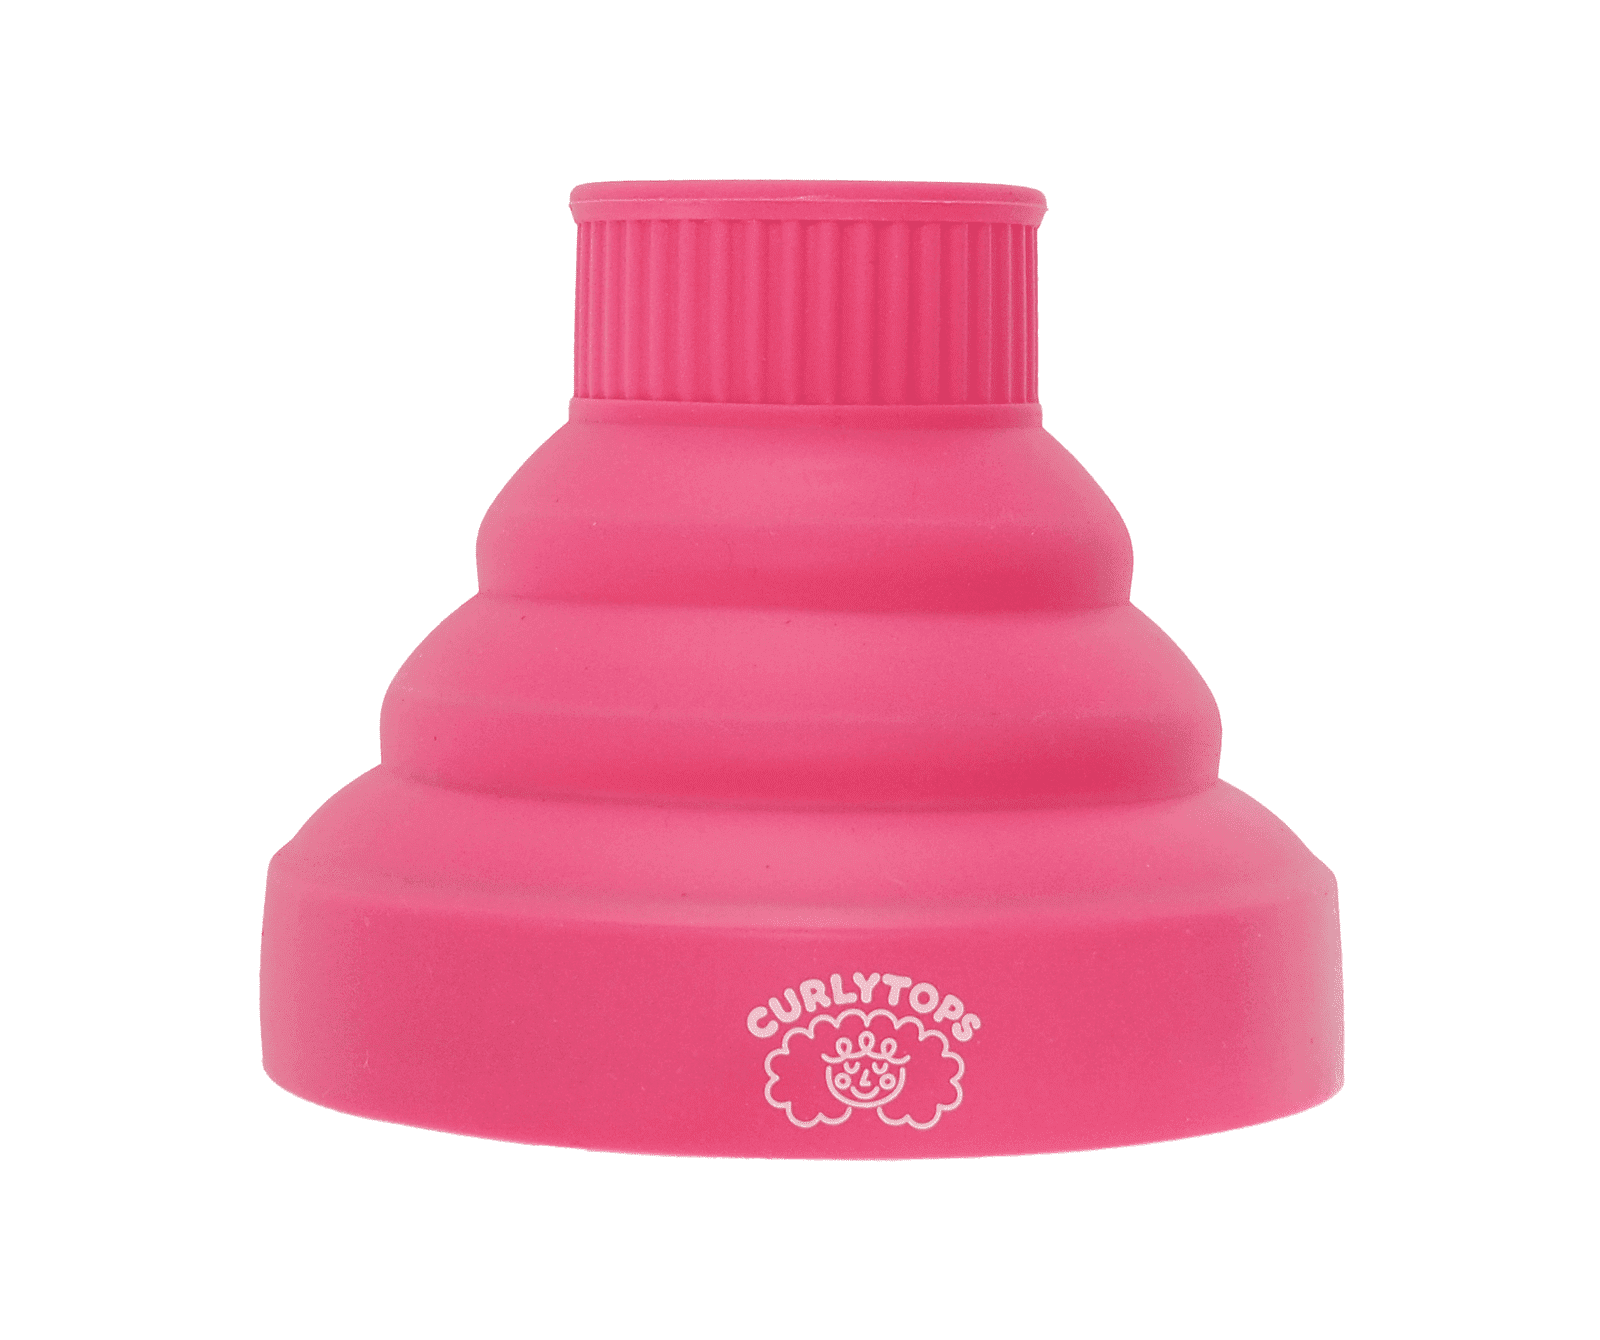 Curlytops Silicone Hair Diffuser